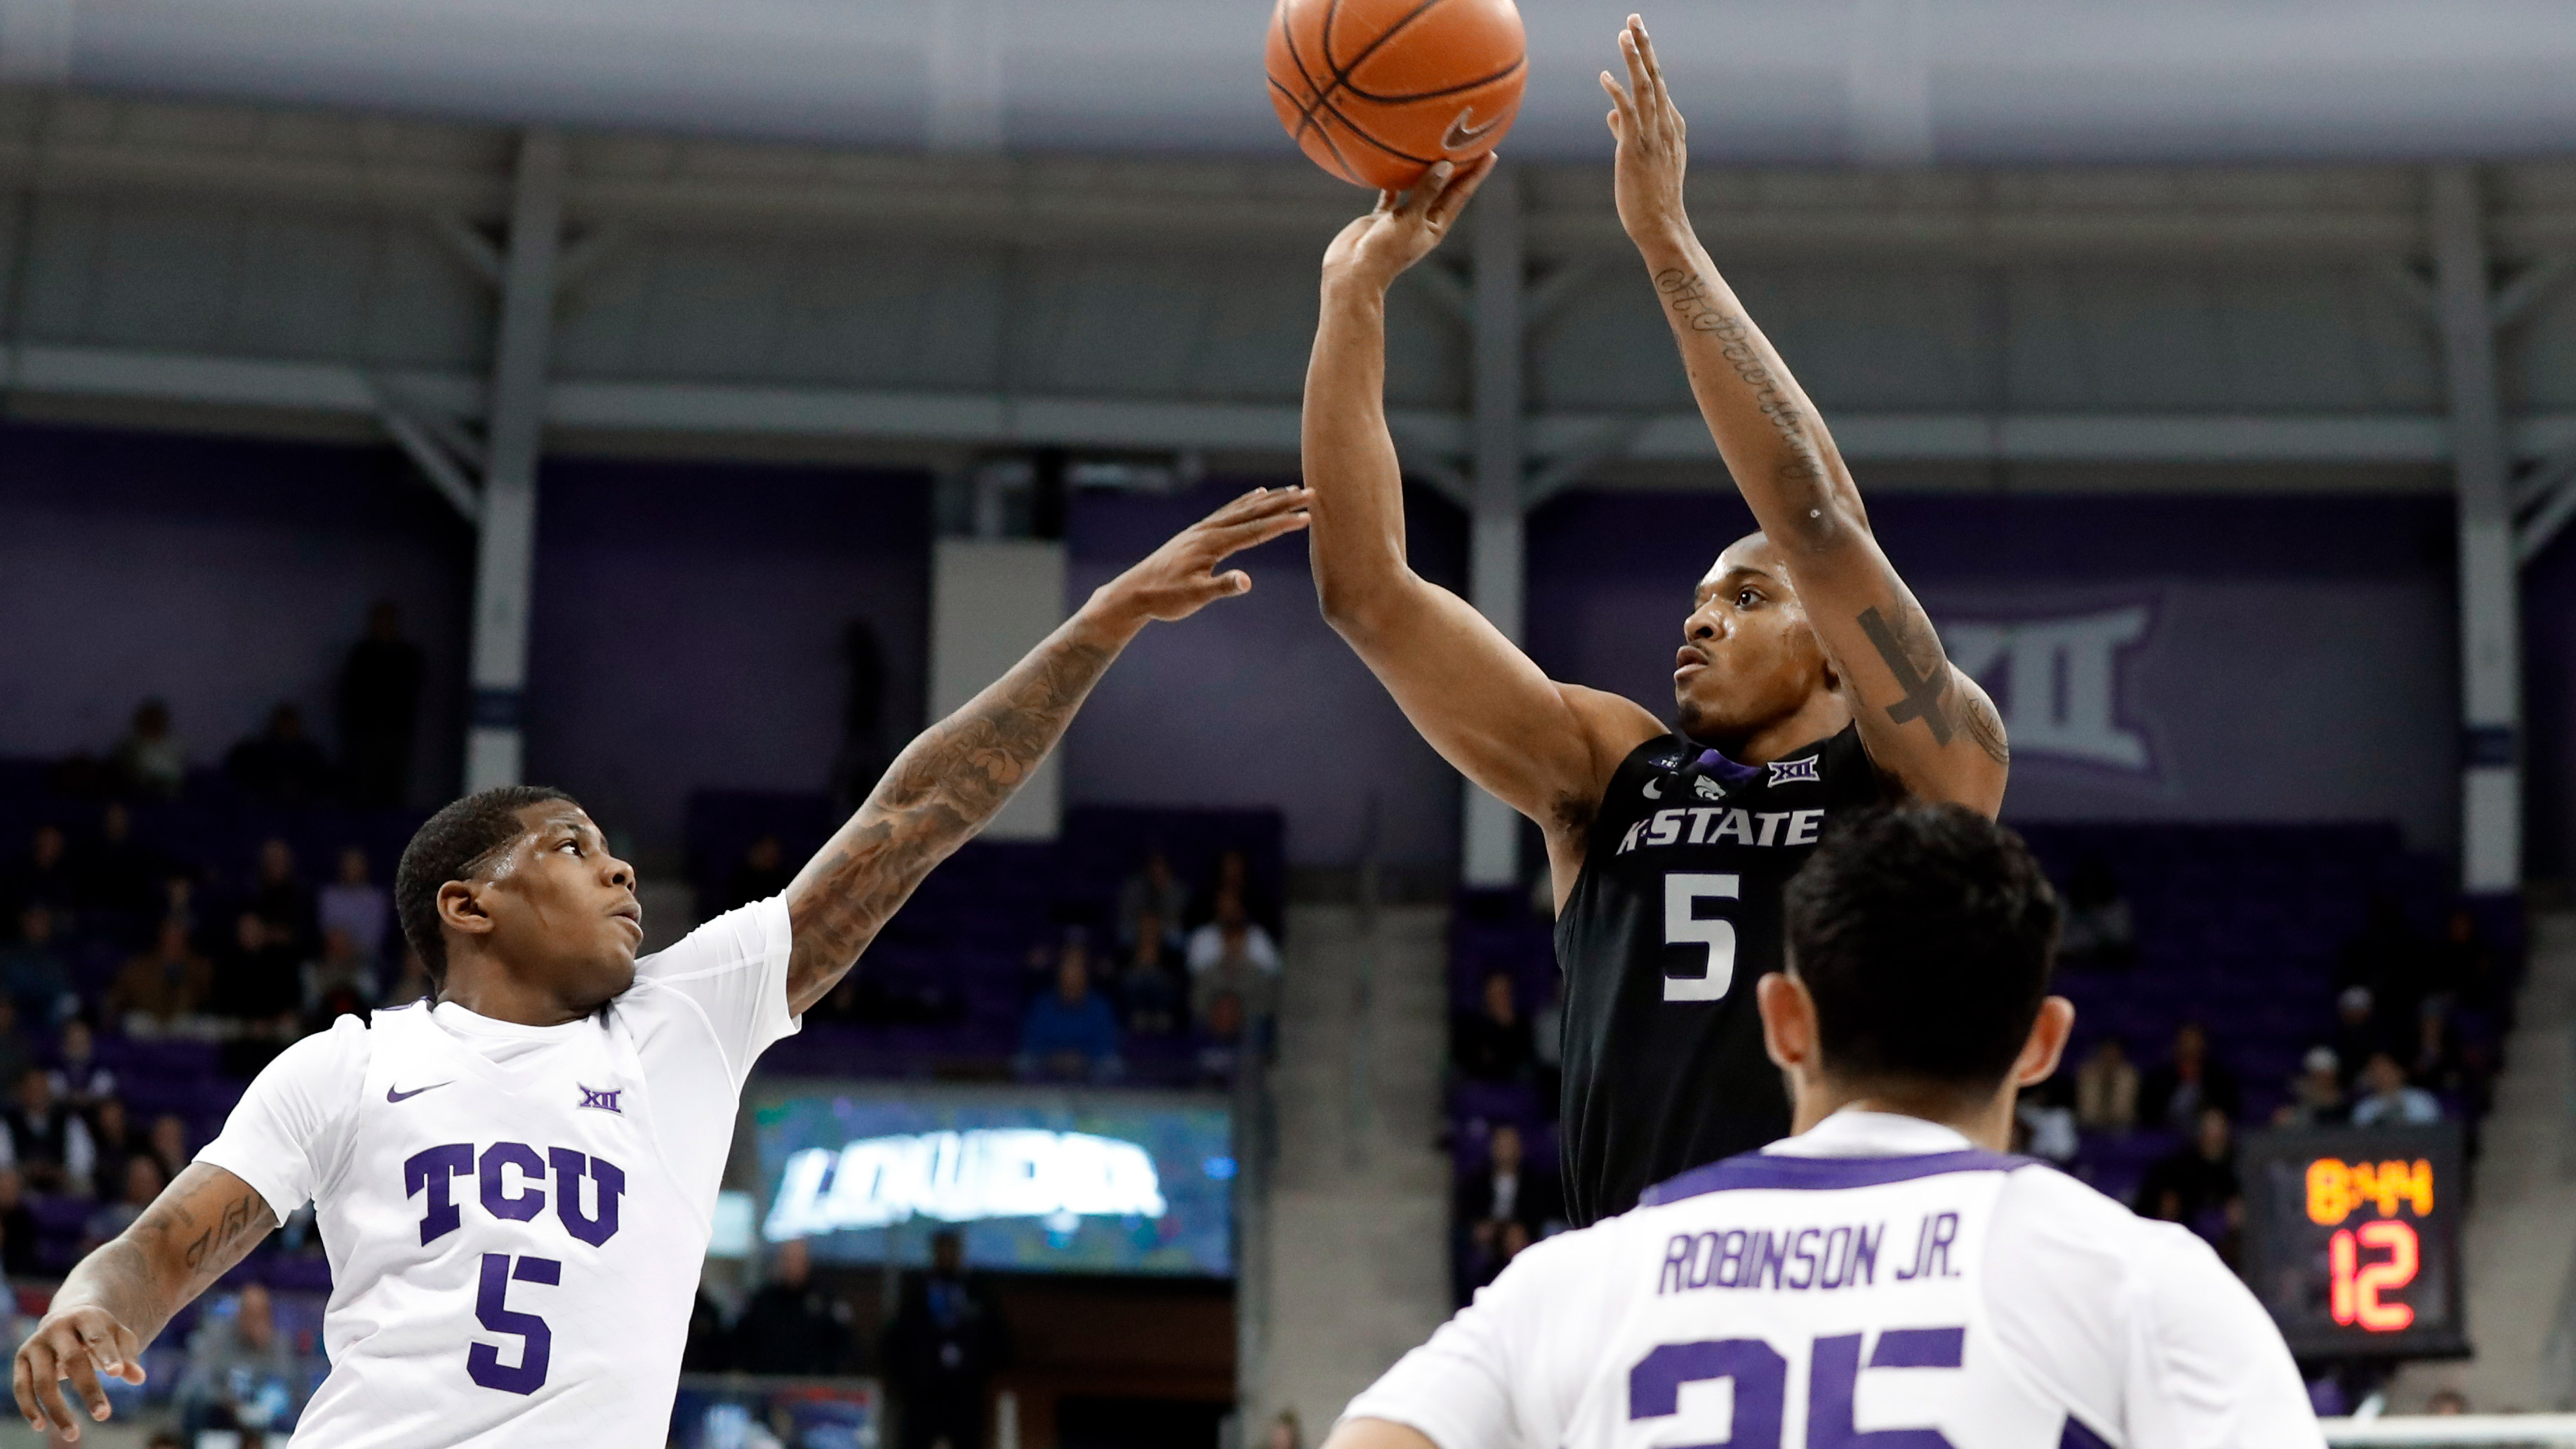 Wildcats maintain tie for Big 12 lead with 64-52 win at TCU